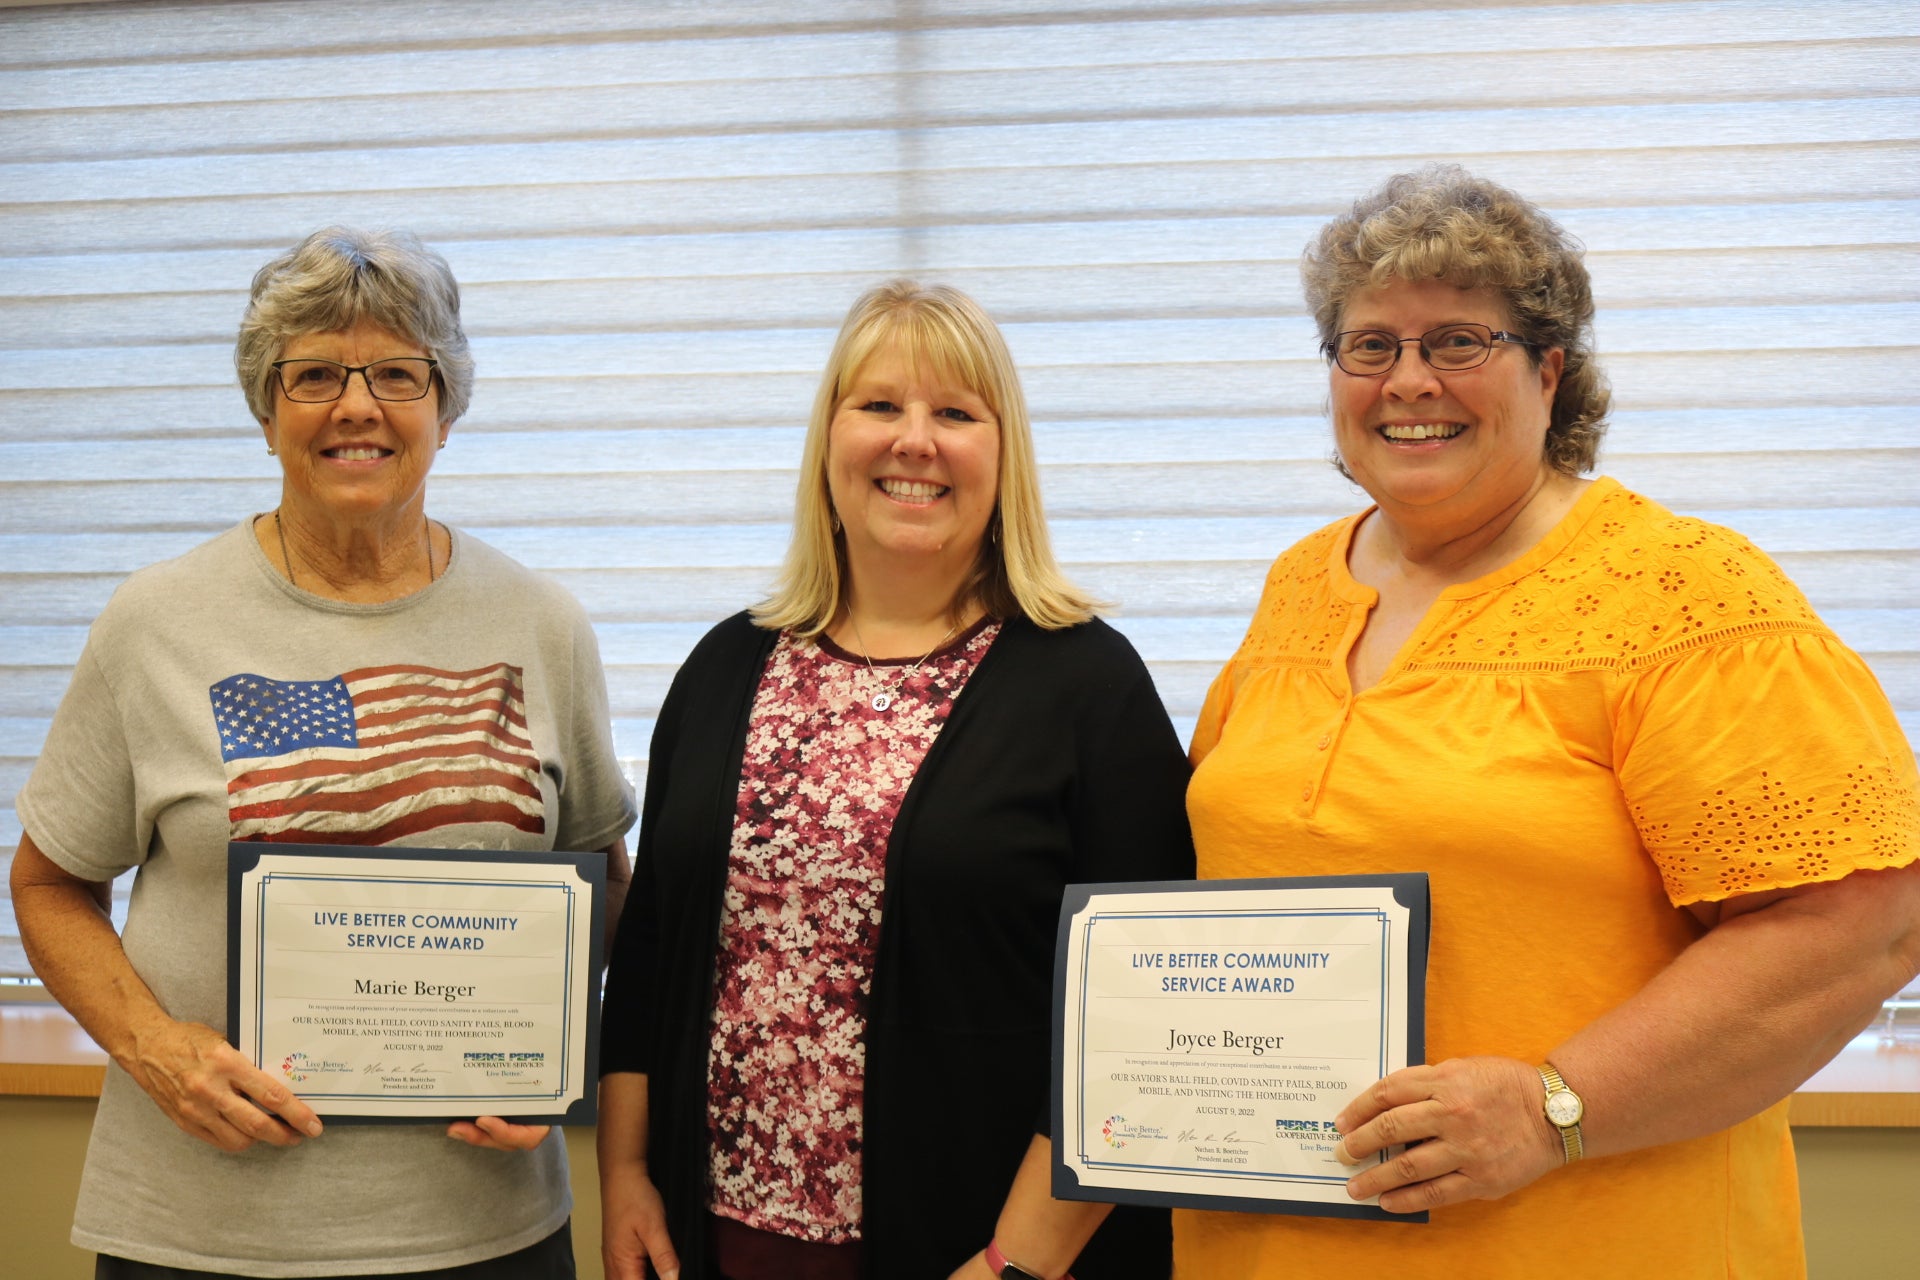 Charity Lubich (center) presented the Live Better Award to the Berger sisters